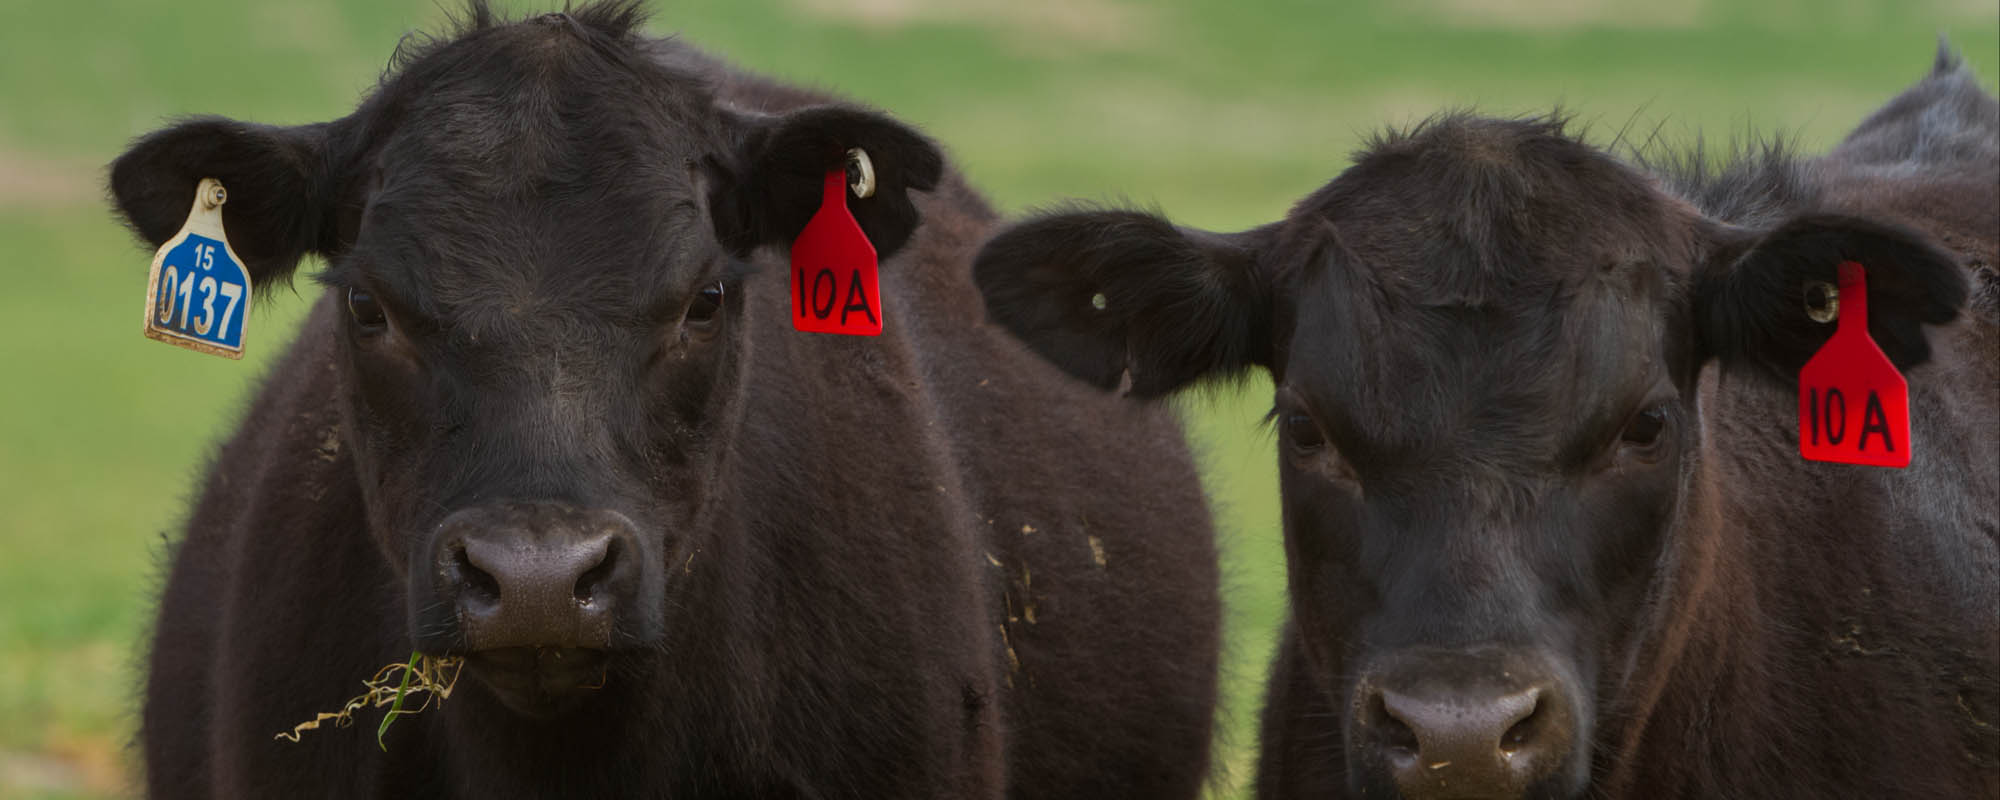 Cows with cattle tags